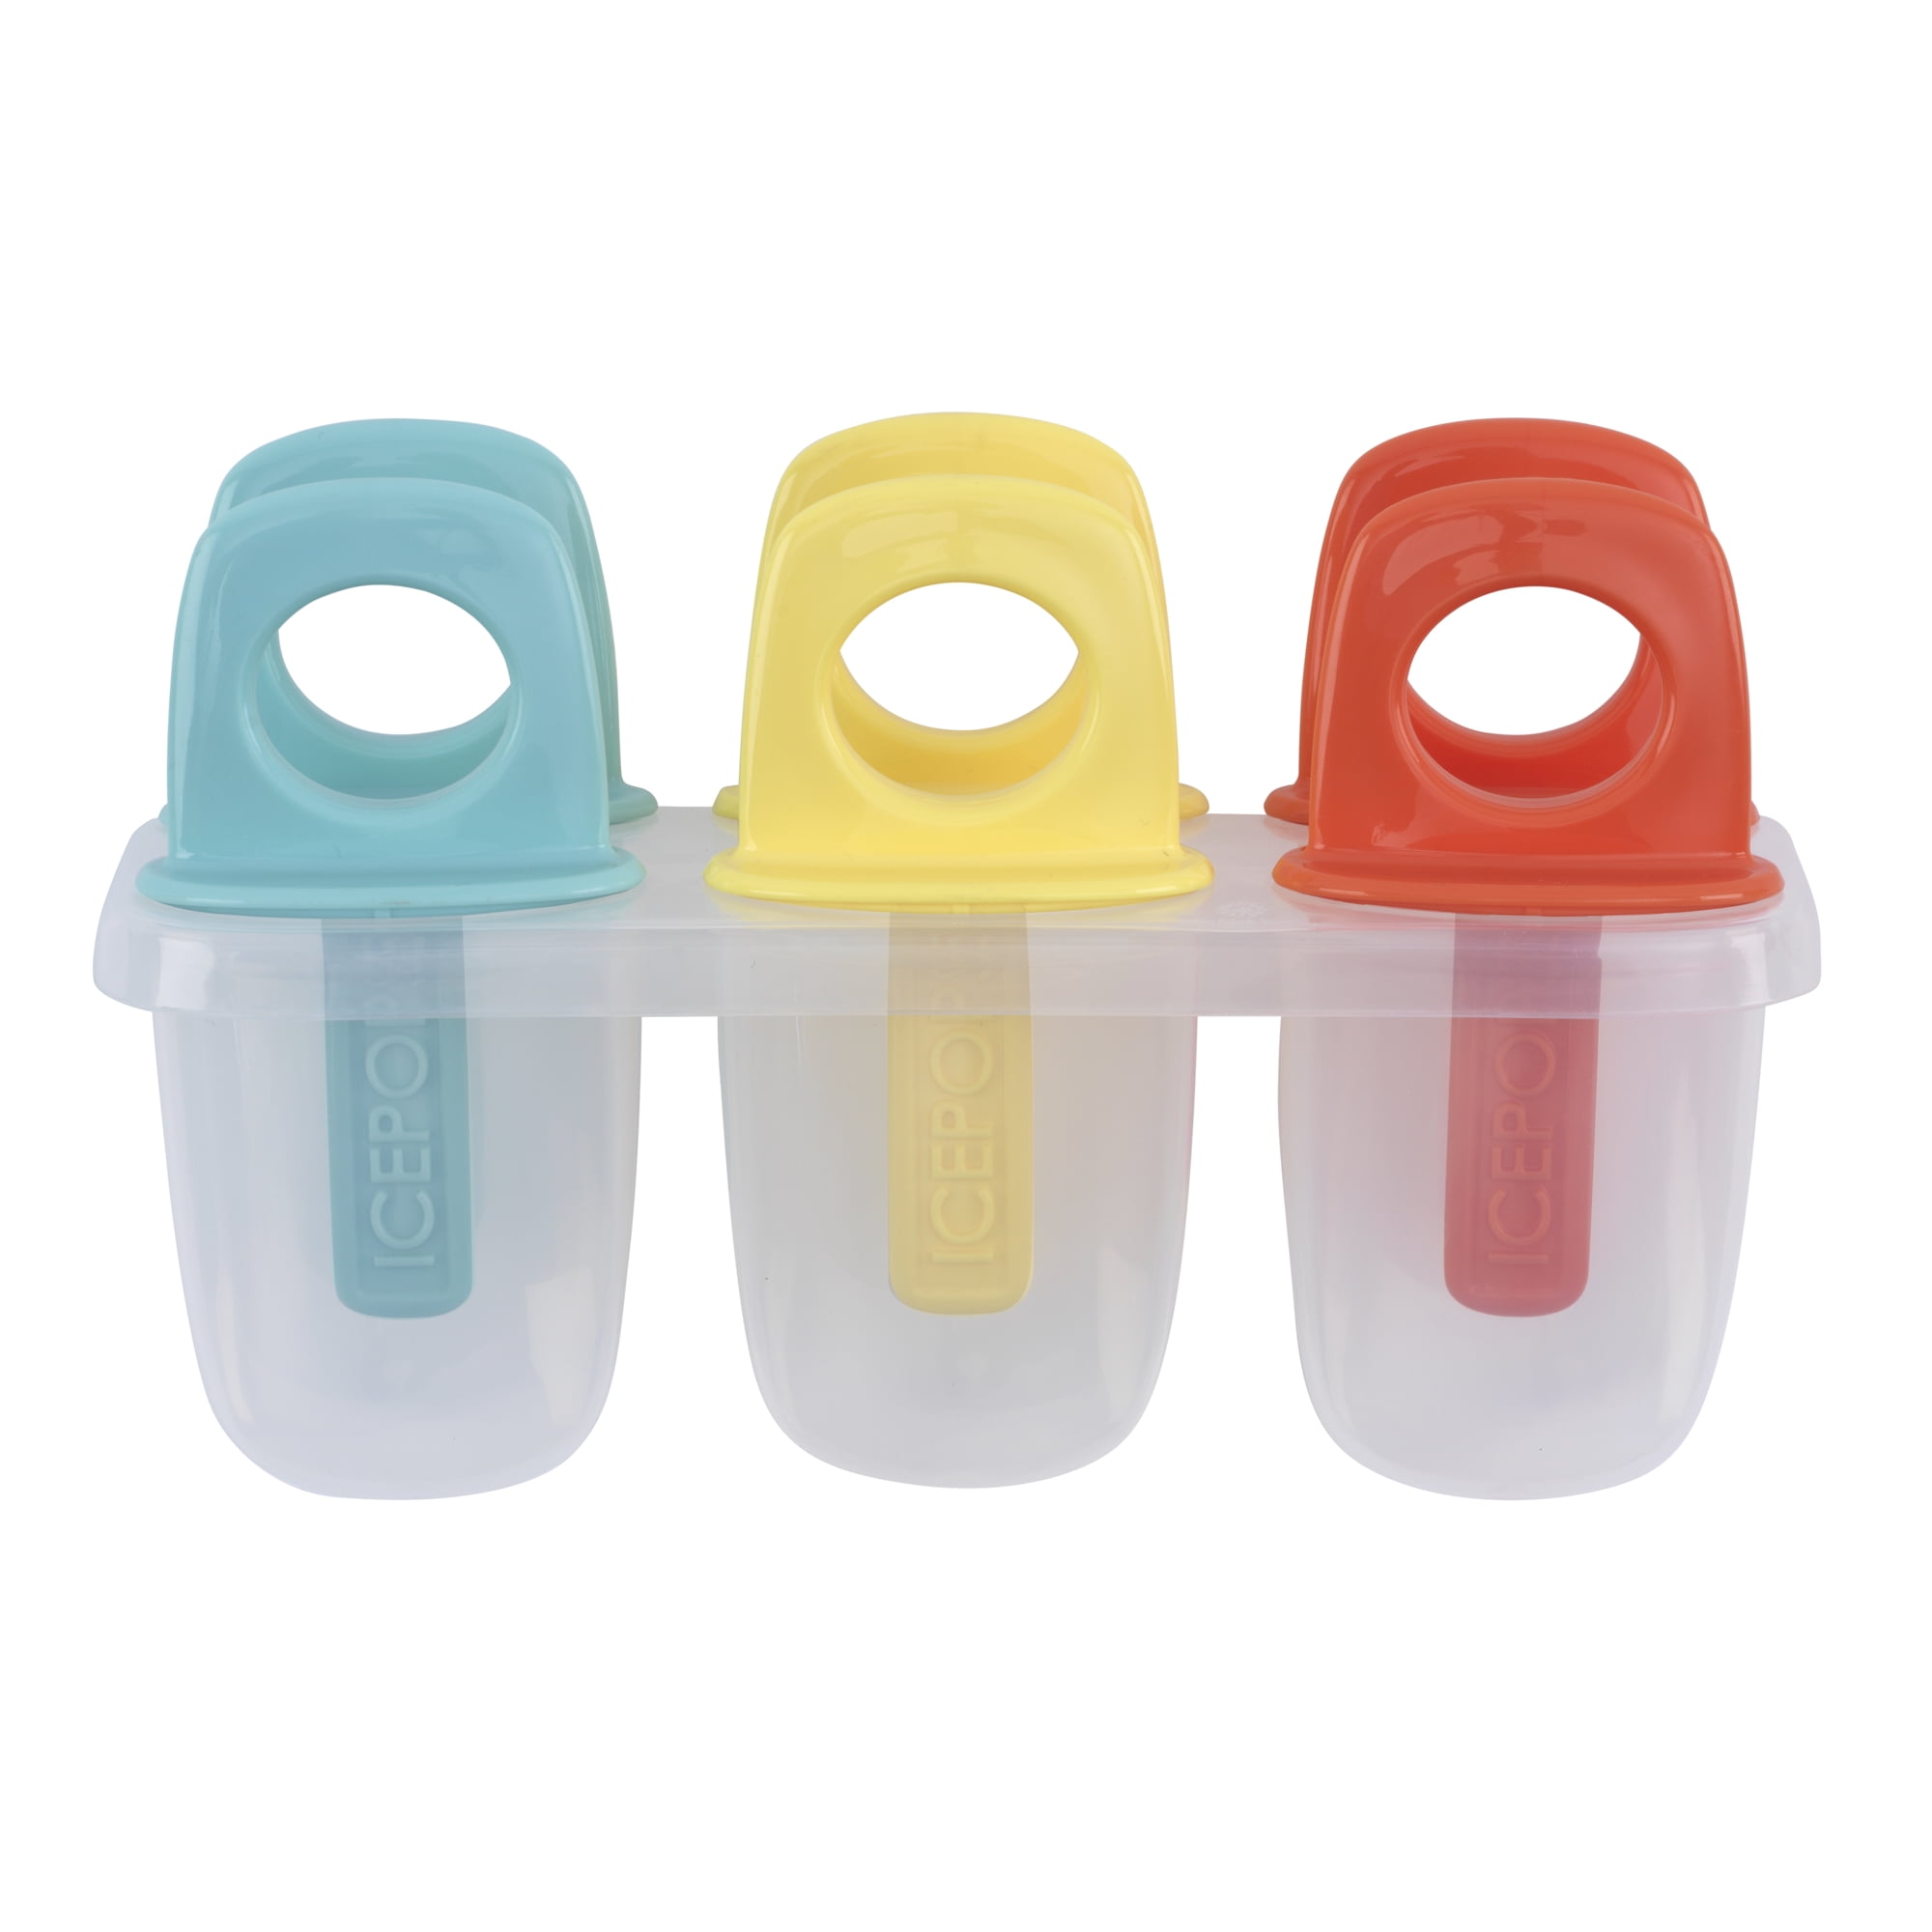 GoodCook ProFreshionals Ice Pop Maker, Makes 6 Ice Pops, Assorted